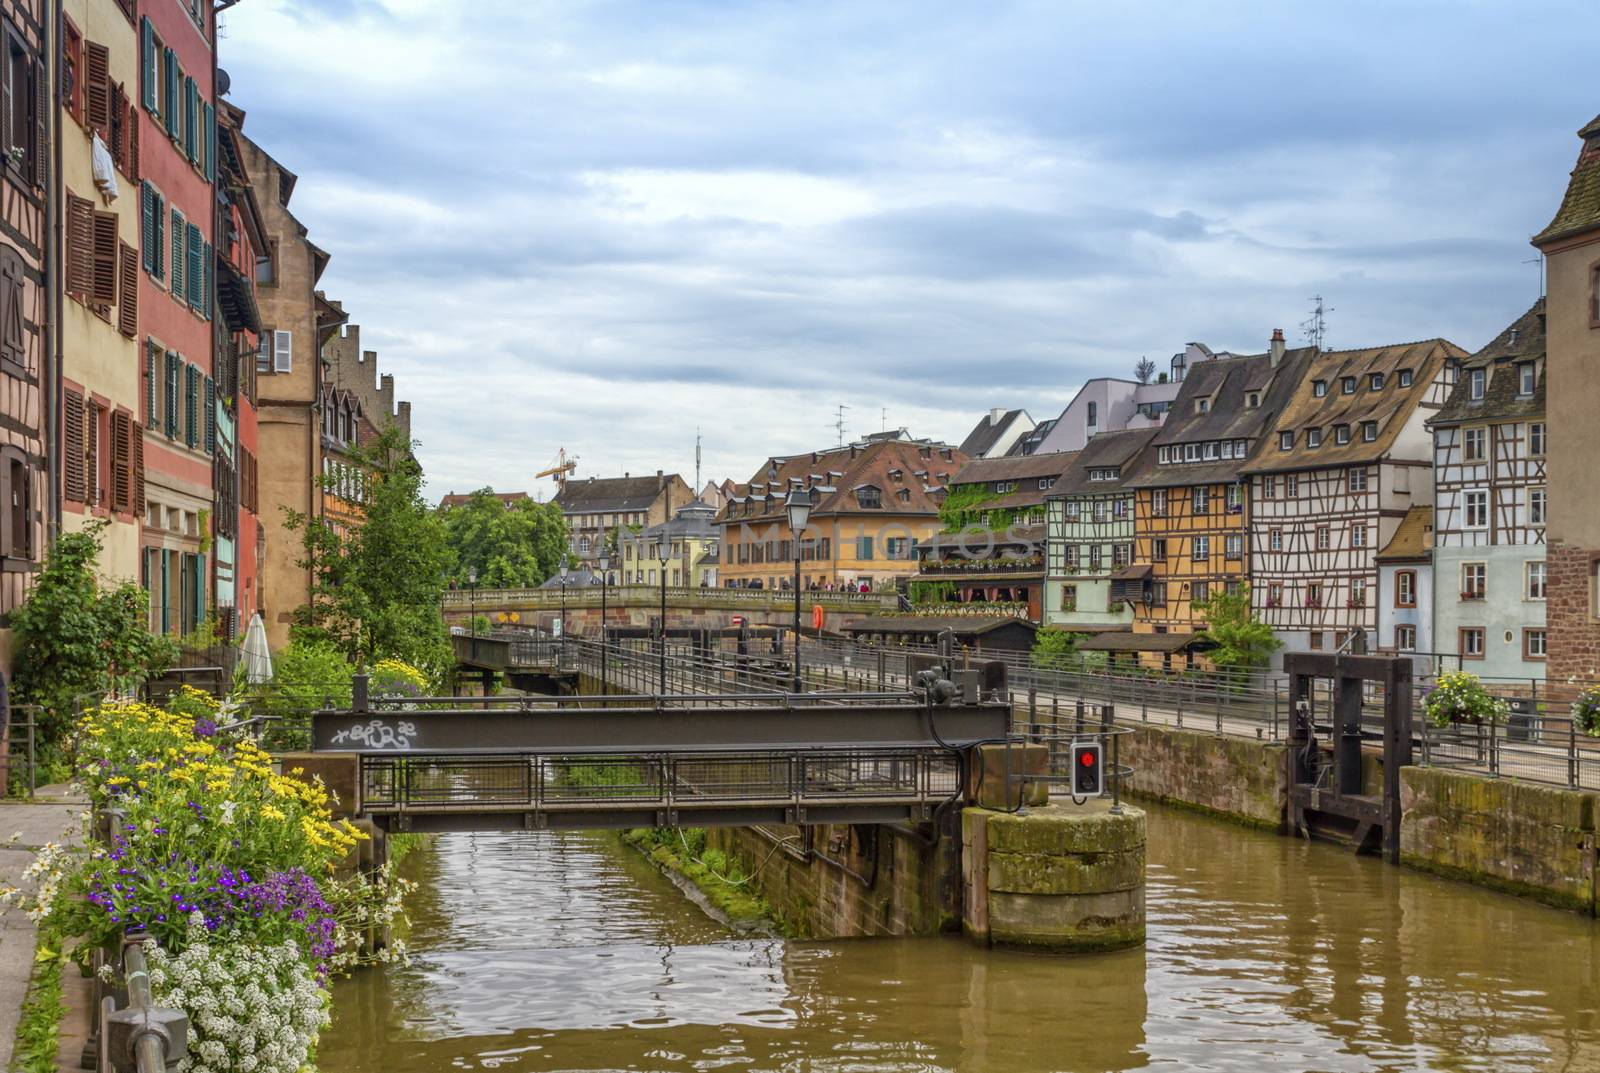 Half-timbered houses and canal in Petite France, Strasbourg, France by Elenaphotos21